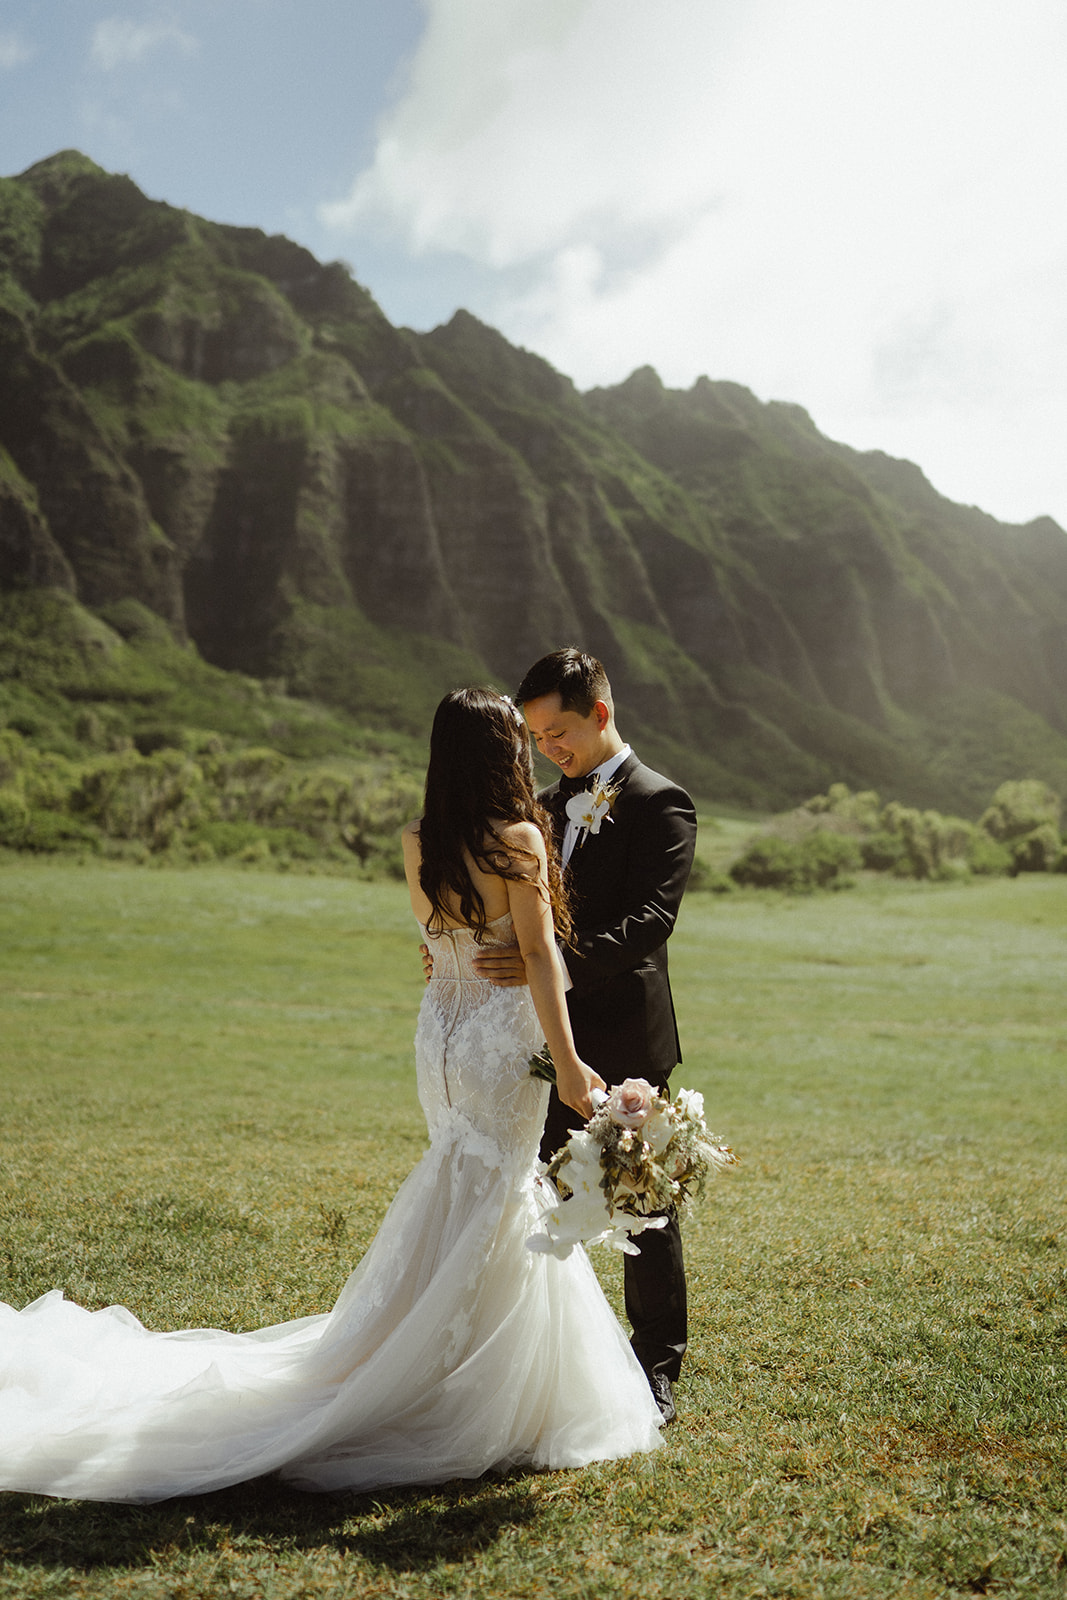 First look with the Bride and Groom before their wedding at Kualoa Ranch Hawaii